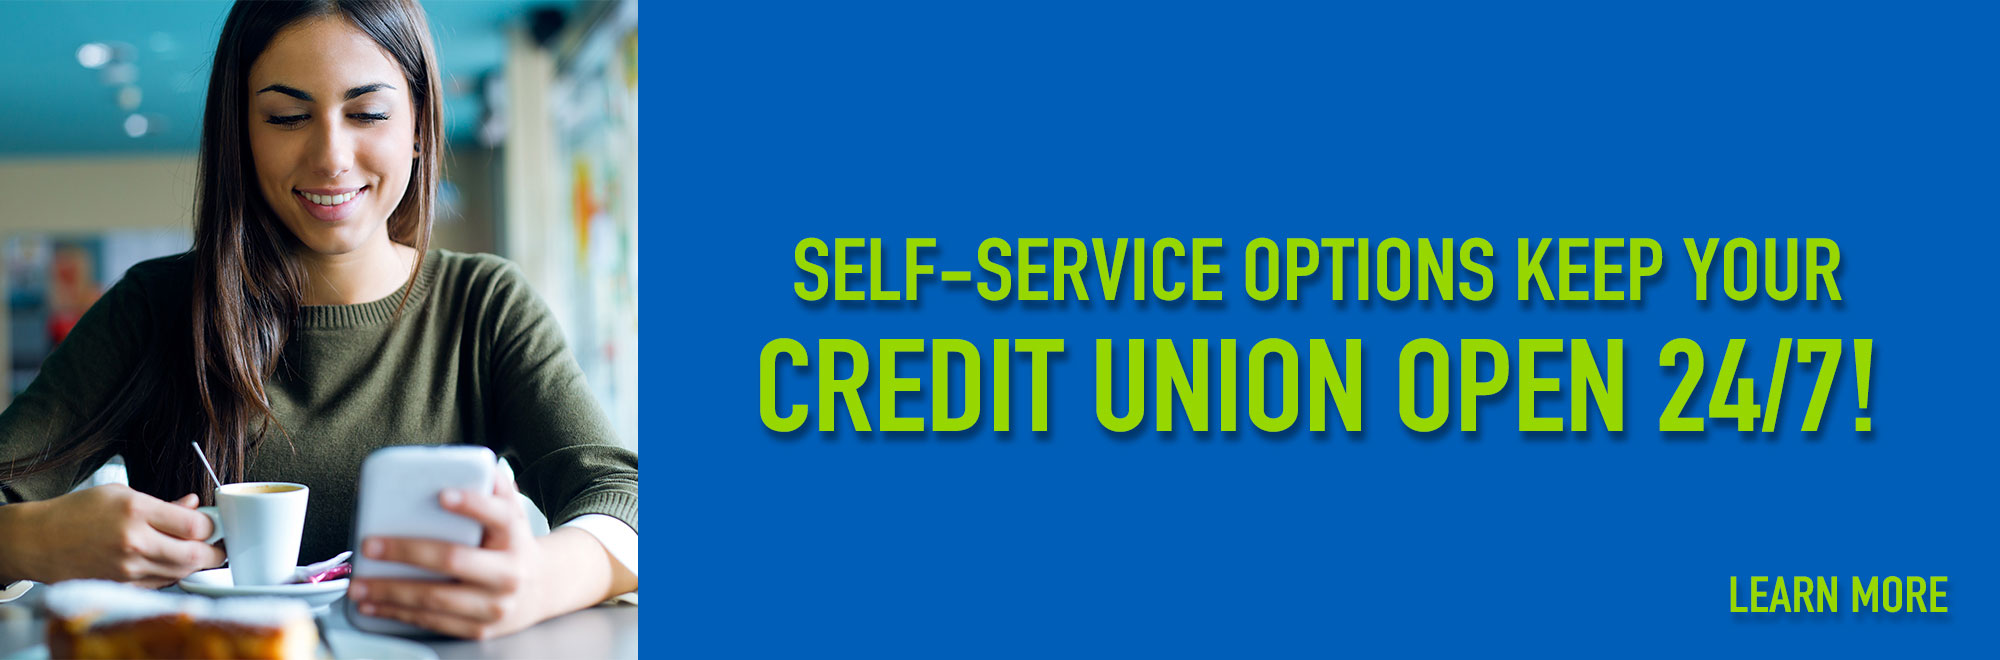 Learn more about Self-service options keep your credit union open 24/7!